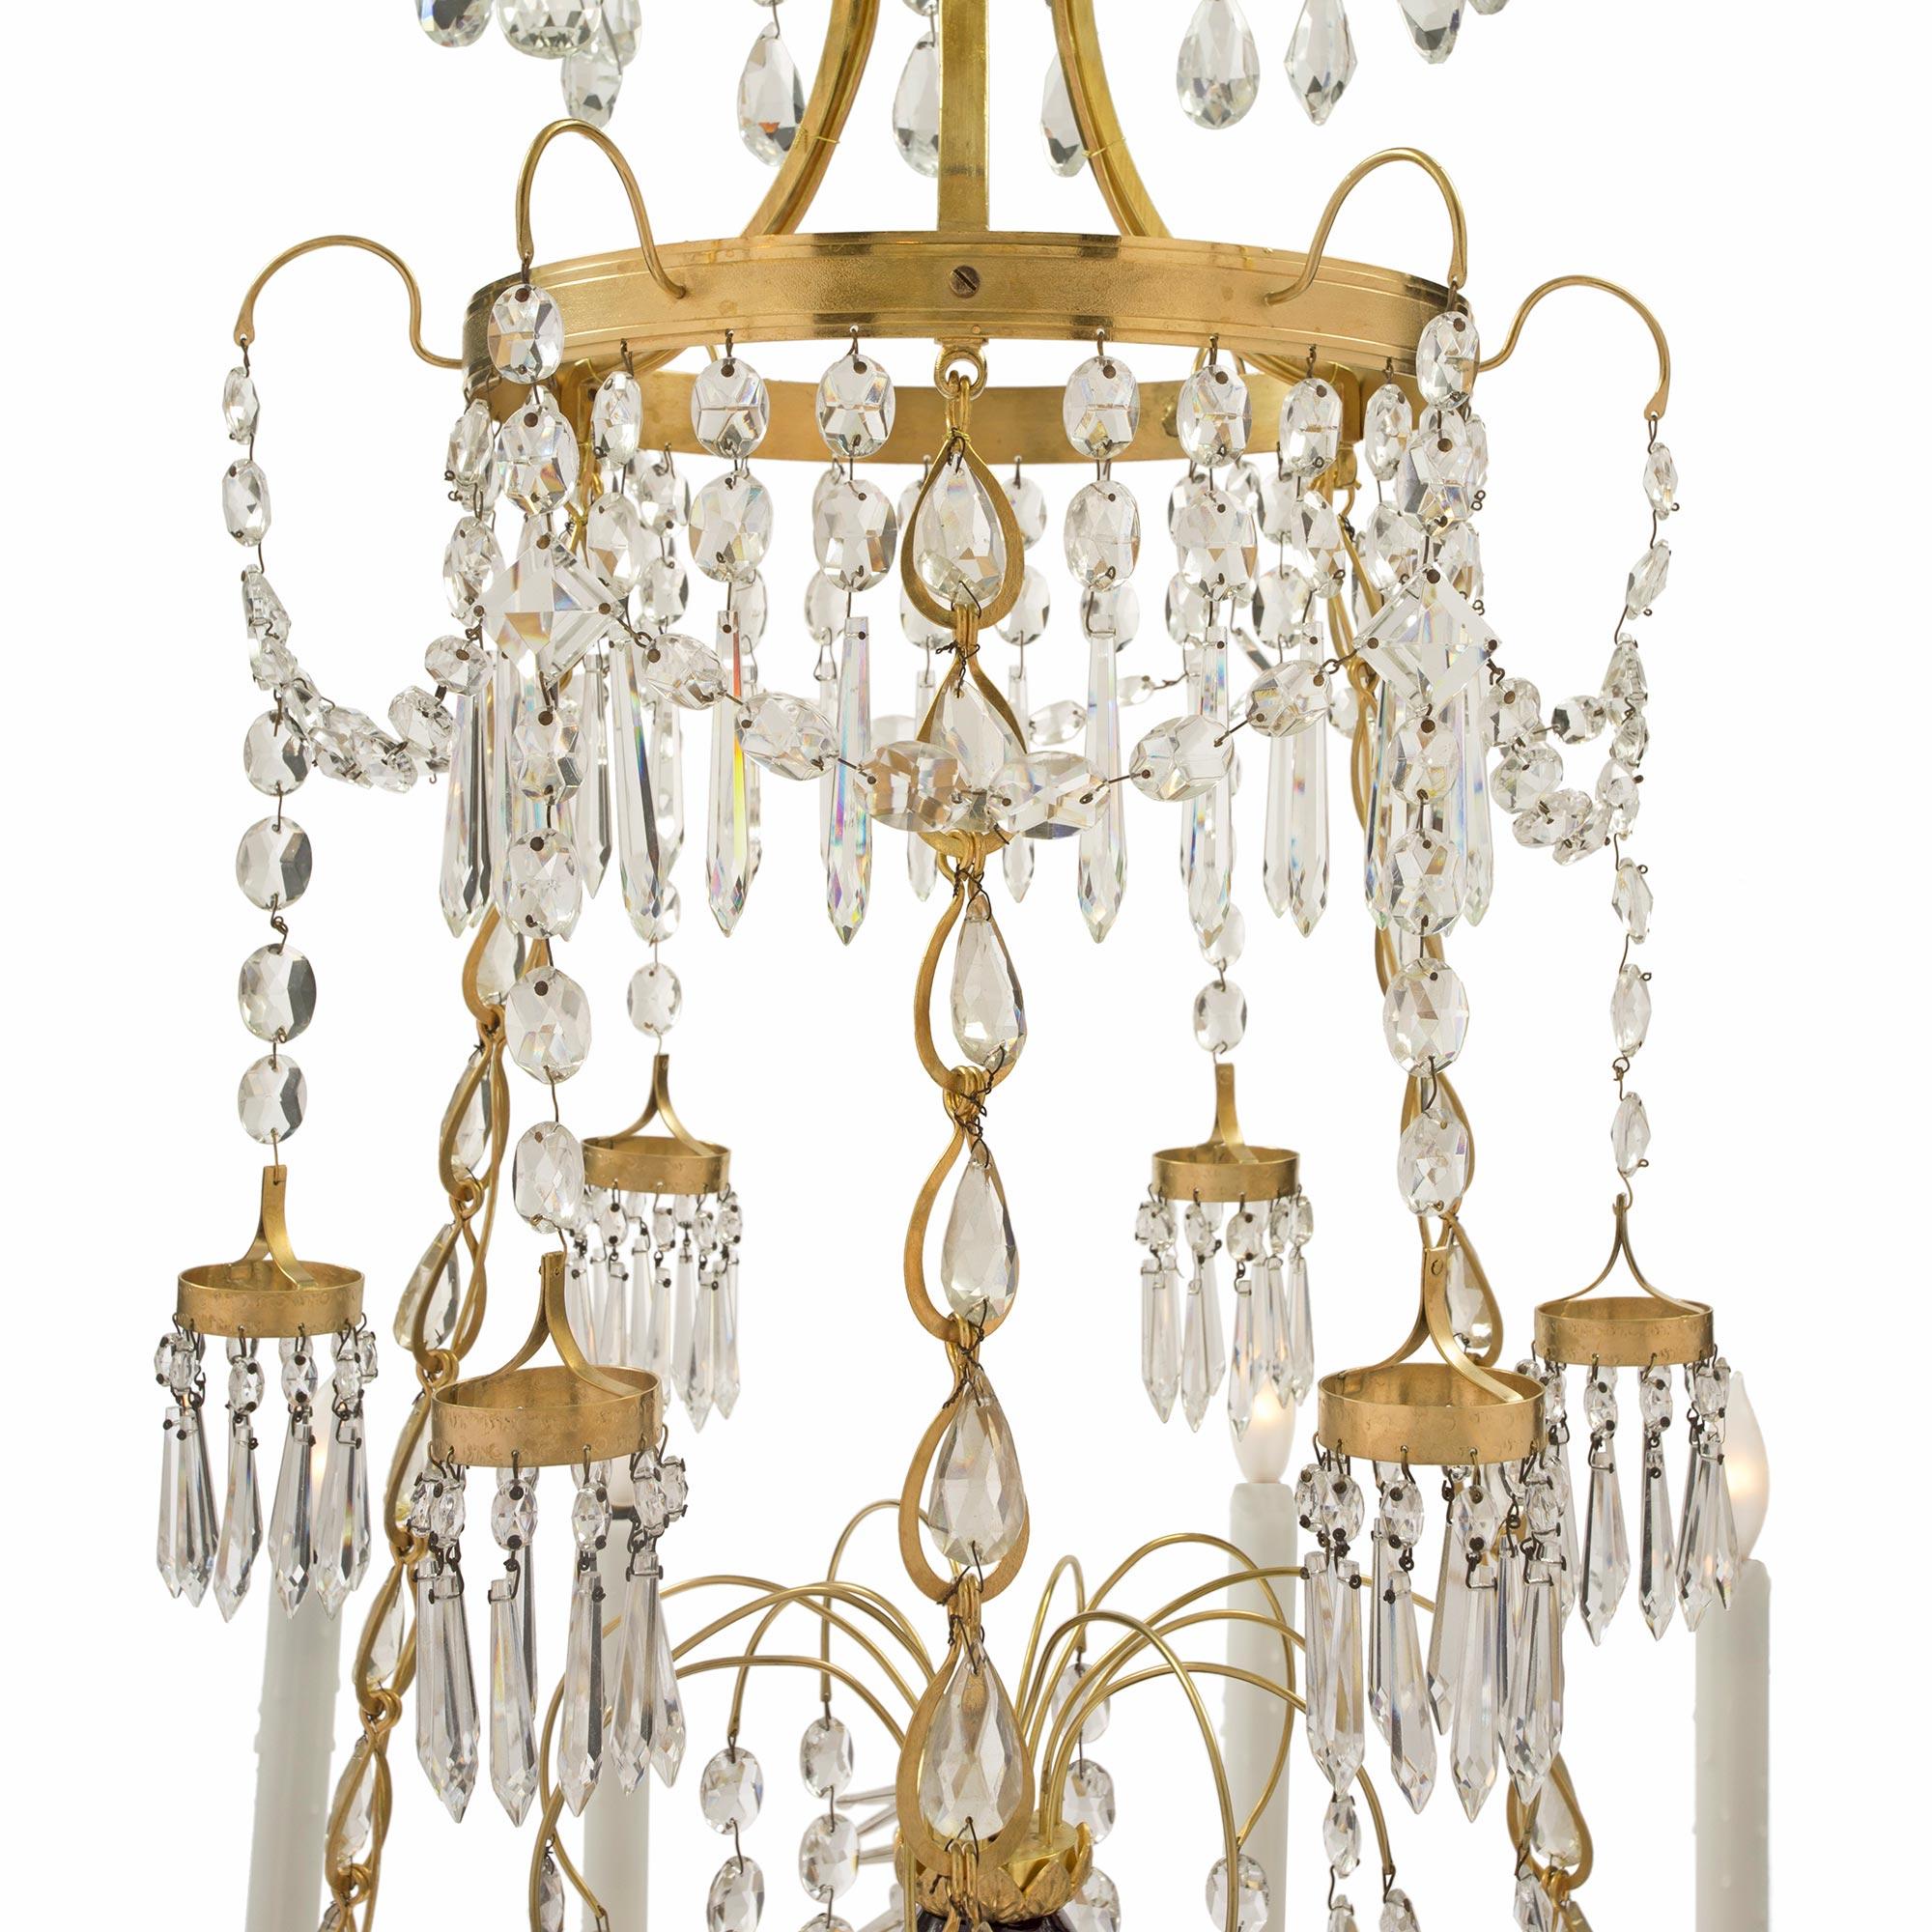 Russian 19th Century Neoclassical Style Glass, Crystal and Ormolu Chandelier For Sale 1